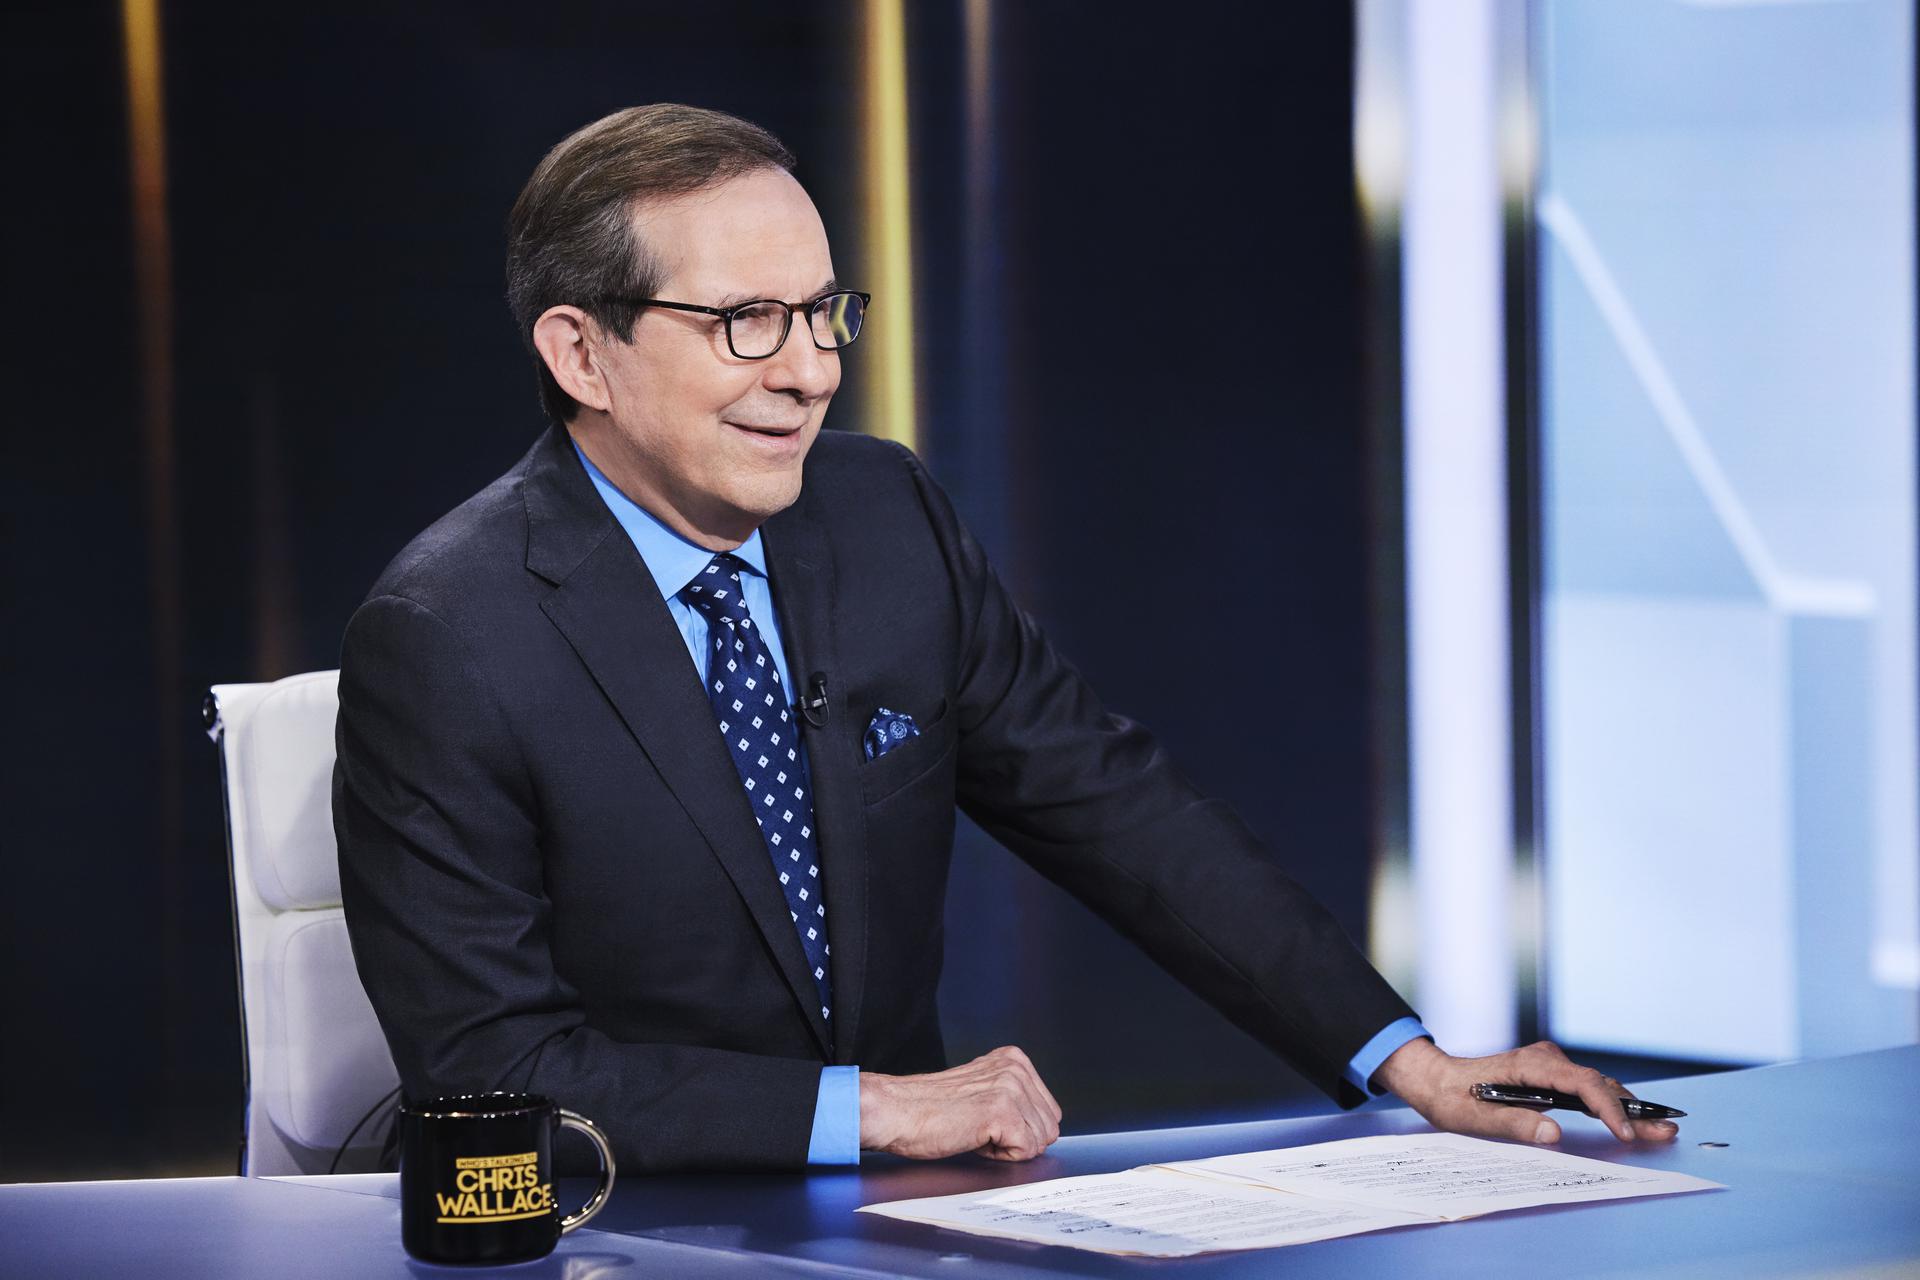 Chris Wallace on the set of his TV show